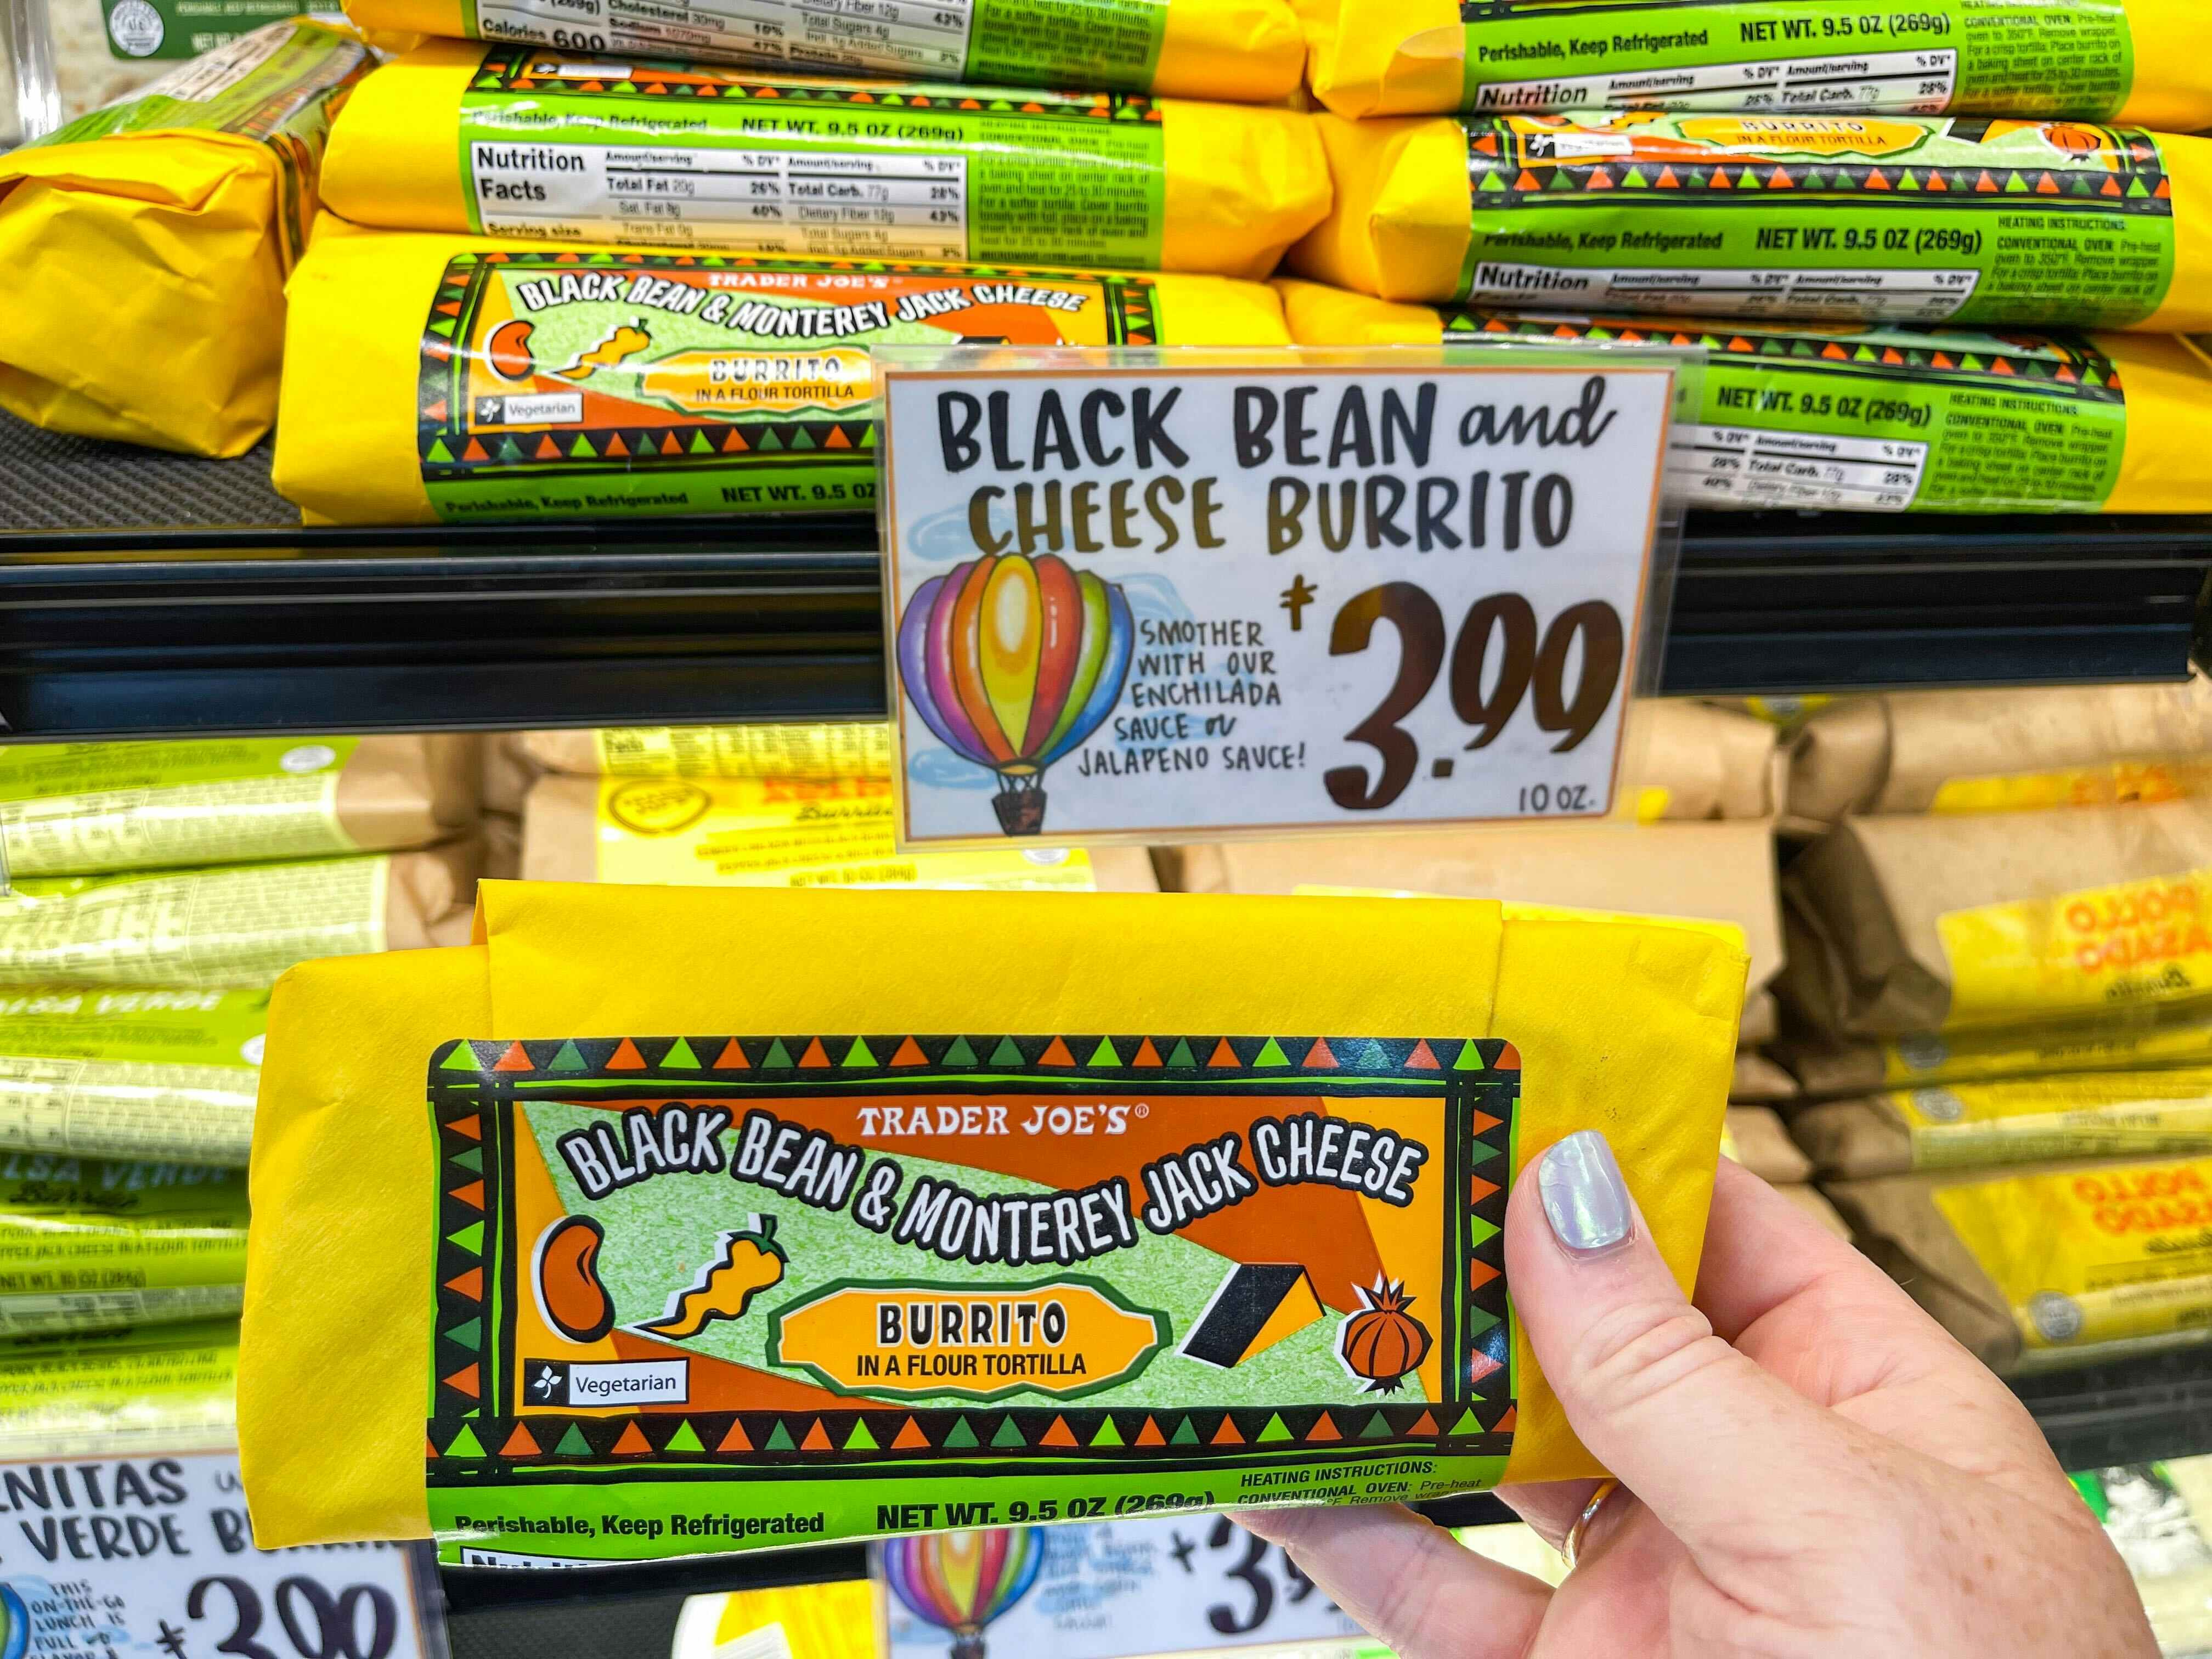 A person's hand holding a Trader Joe's Black Bean and Cheese Burrito in front of a shelf of them inside Trader Joe's.